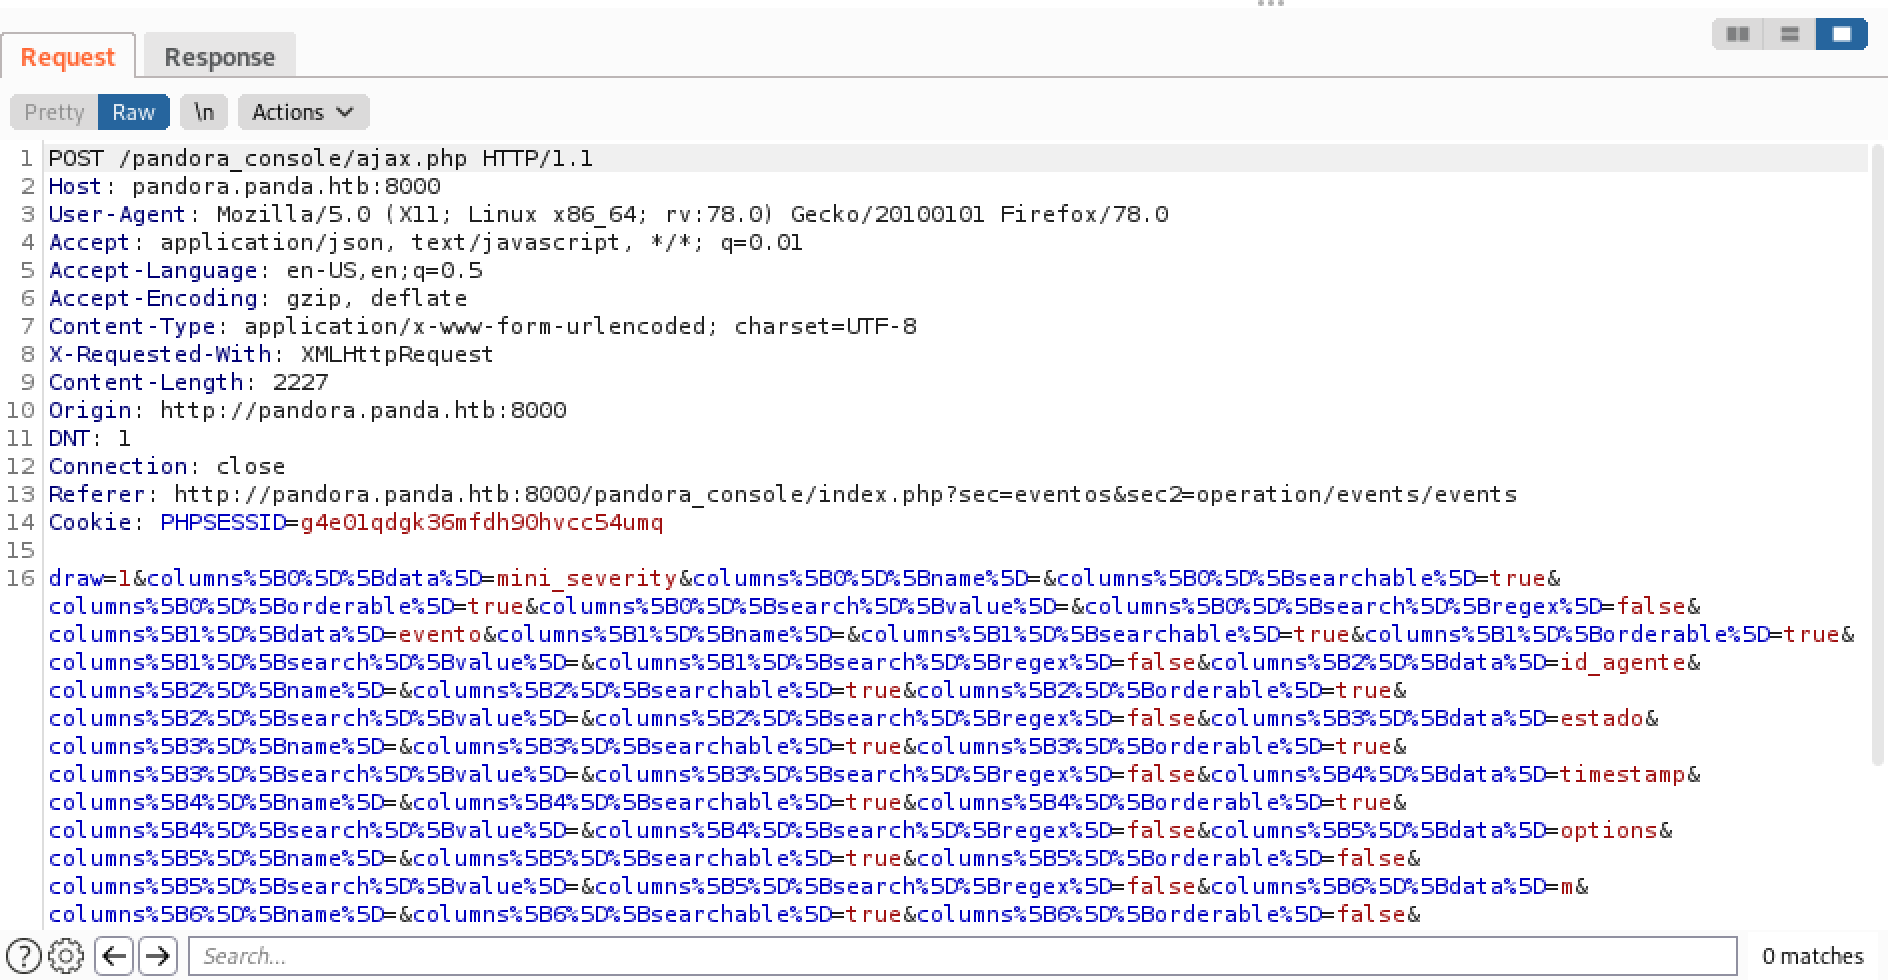 Capturing the 'View events' HTTP request in Burp Suite.